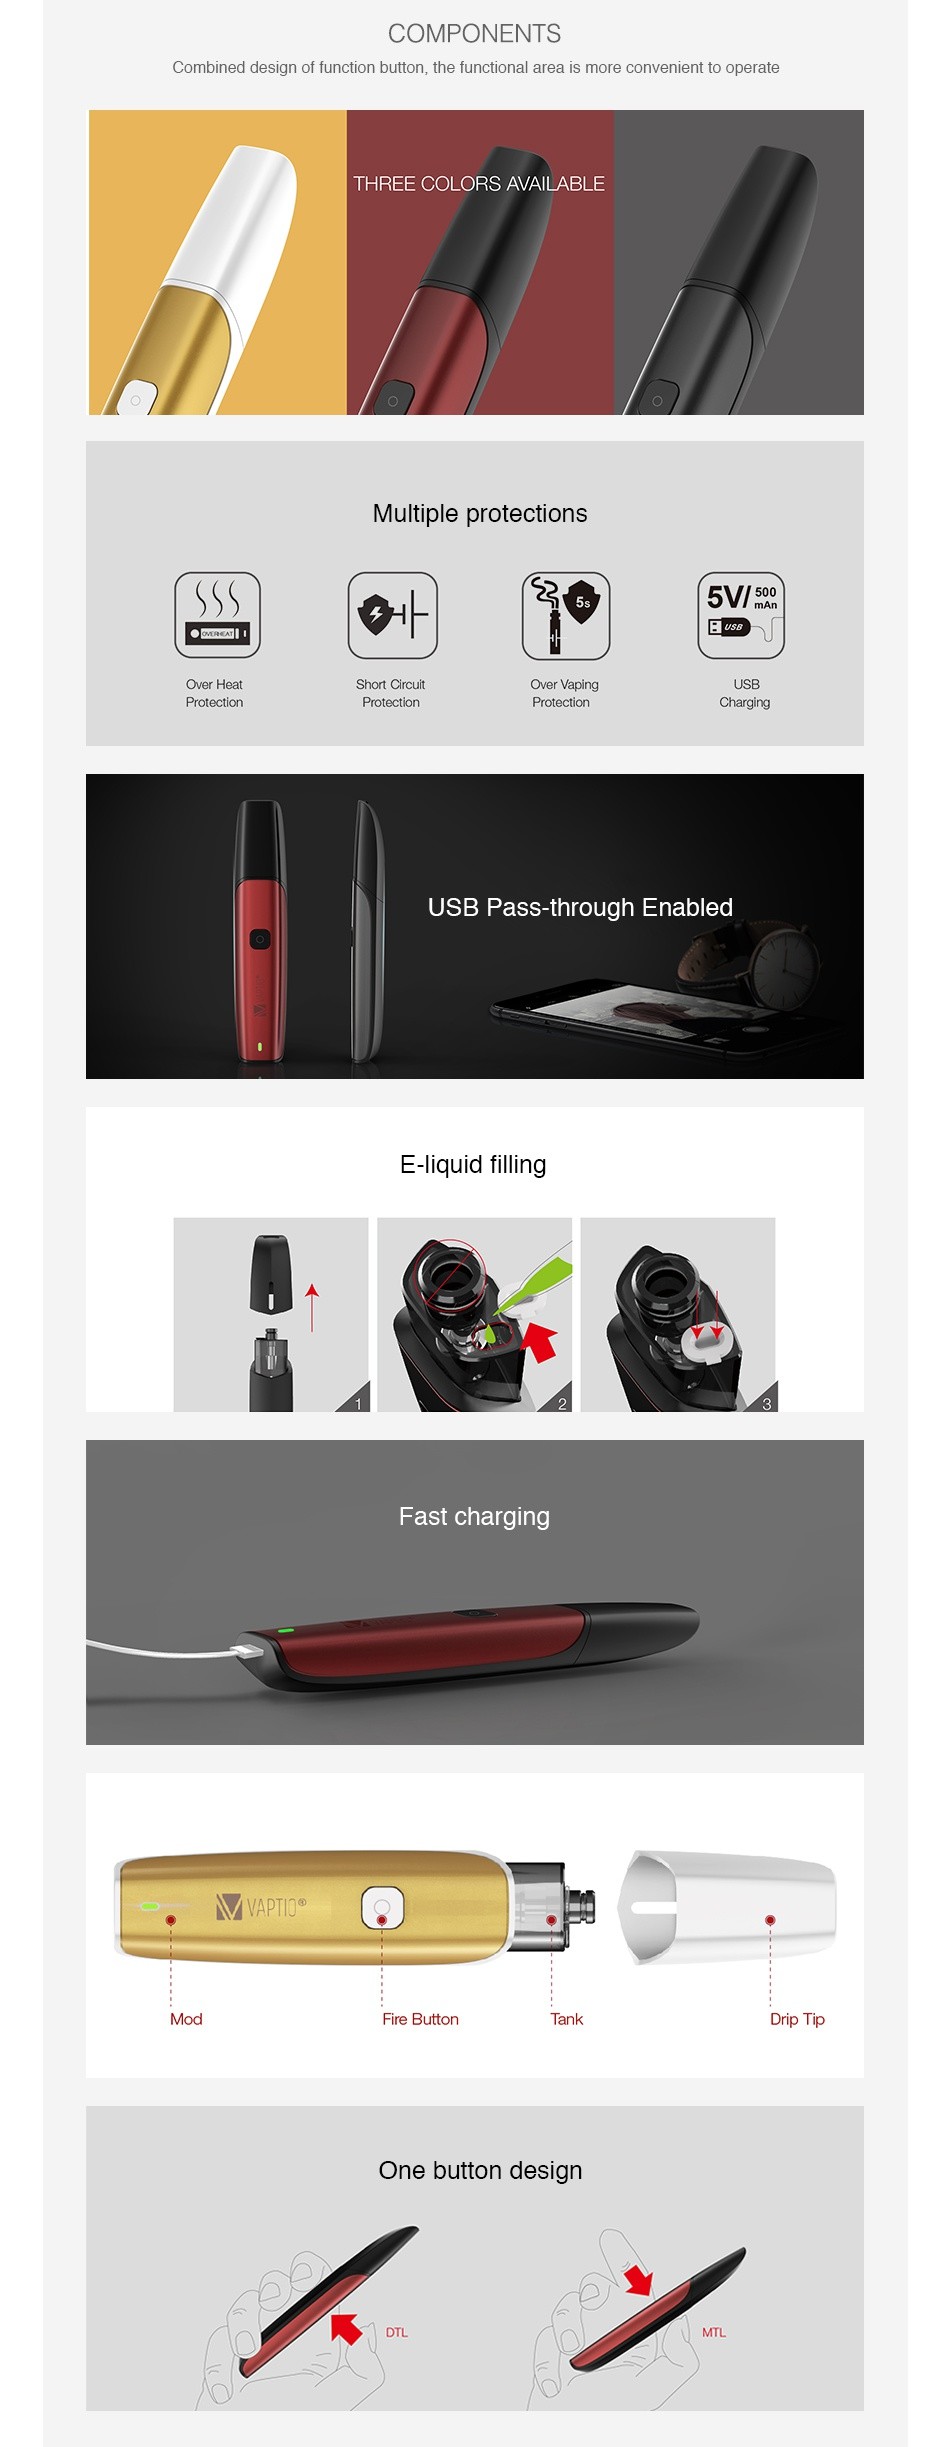 Vaptio C-Flat Pod Kit 350mAh COMPONENTS Combined design ot tunction button  the functional area is more convenient to operate Multiple protections   Over Heat Short Circu Cver vaping Protecton ChargIng USB Pass through Enabled E liquid filling Fast charging Fire Button One button design